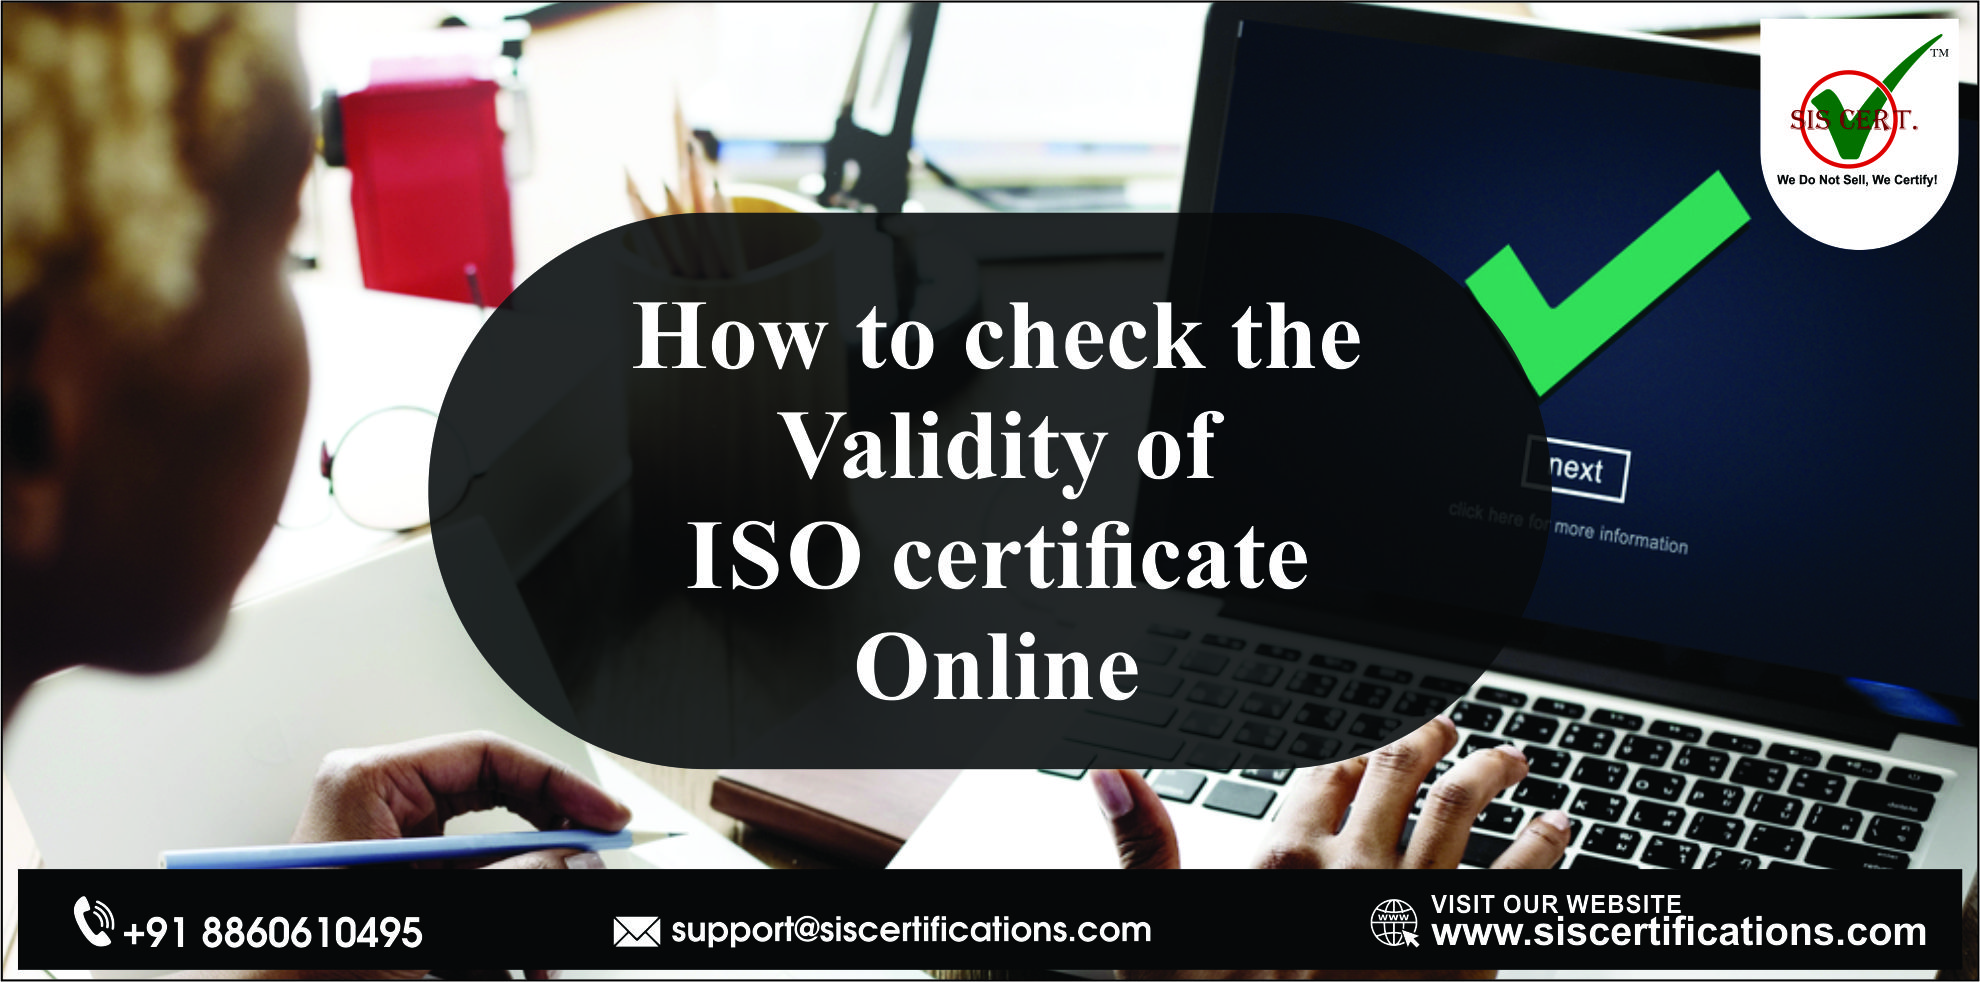 How to check the Validity of ISO Certificate Online